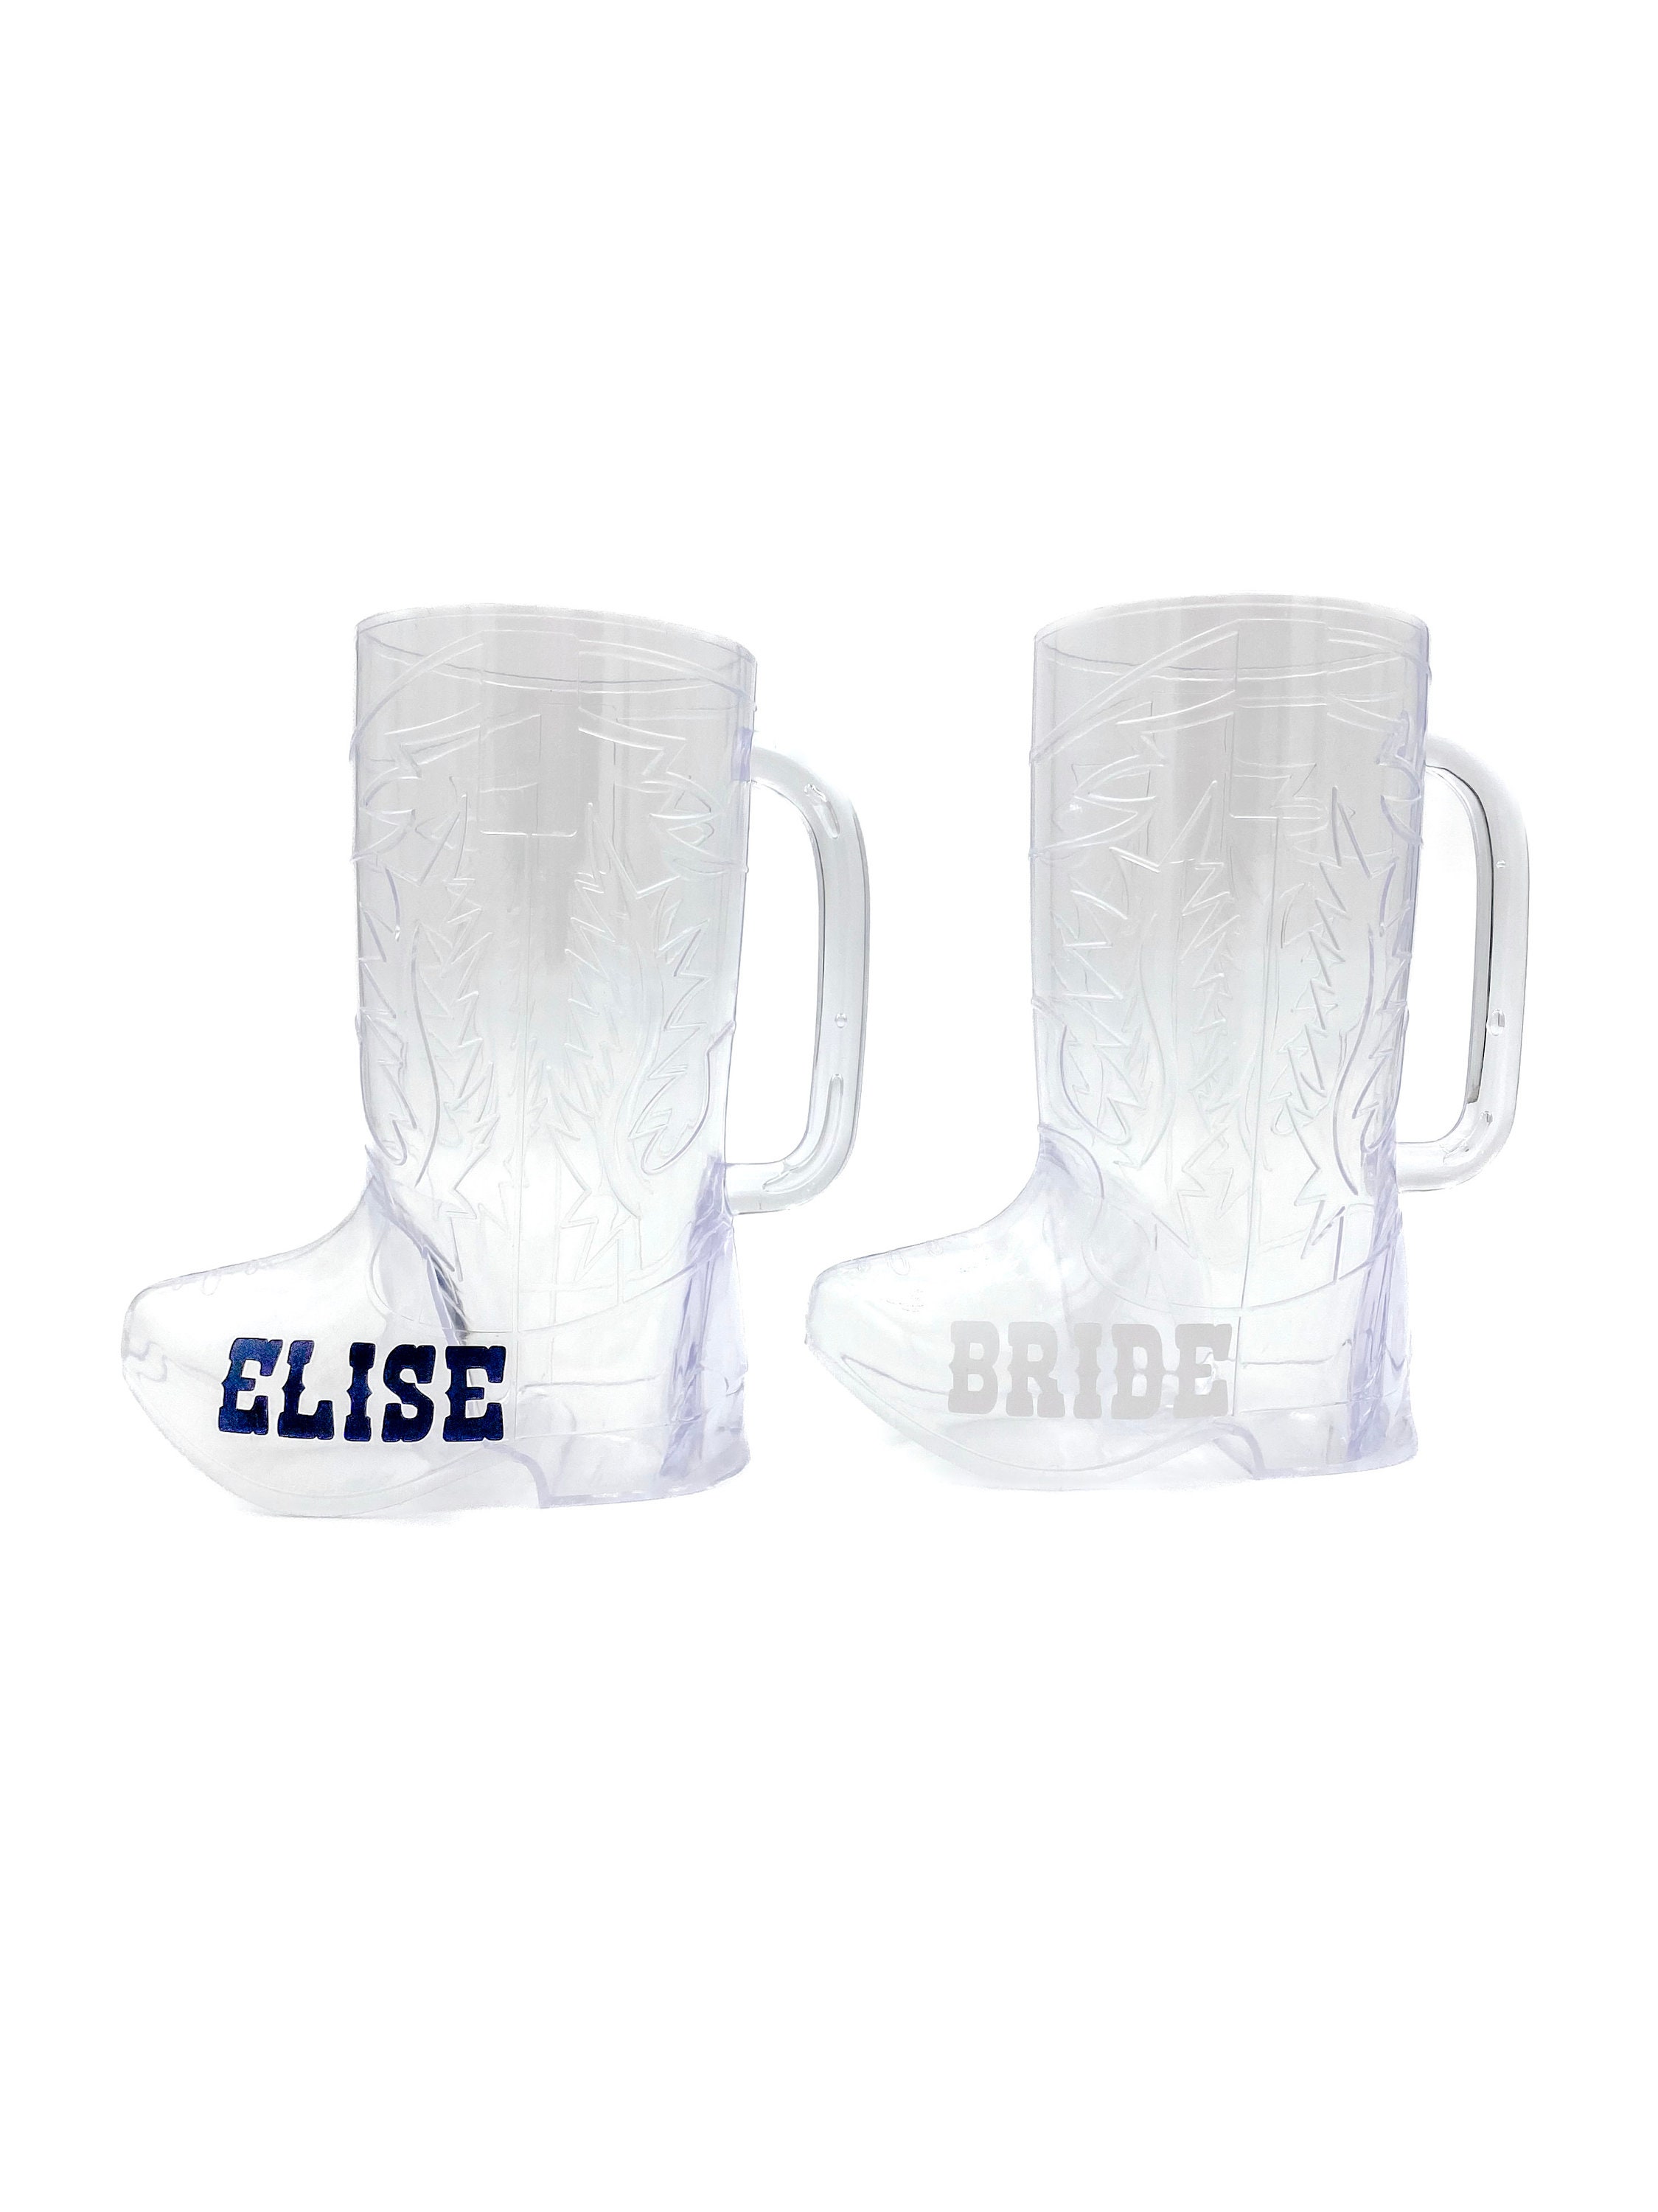 16 oz. Cowboy Boot Shaped LED Light Up Cup